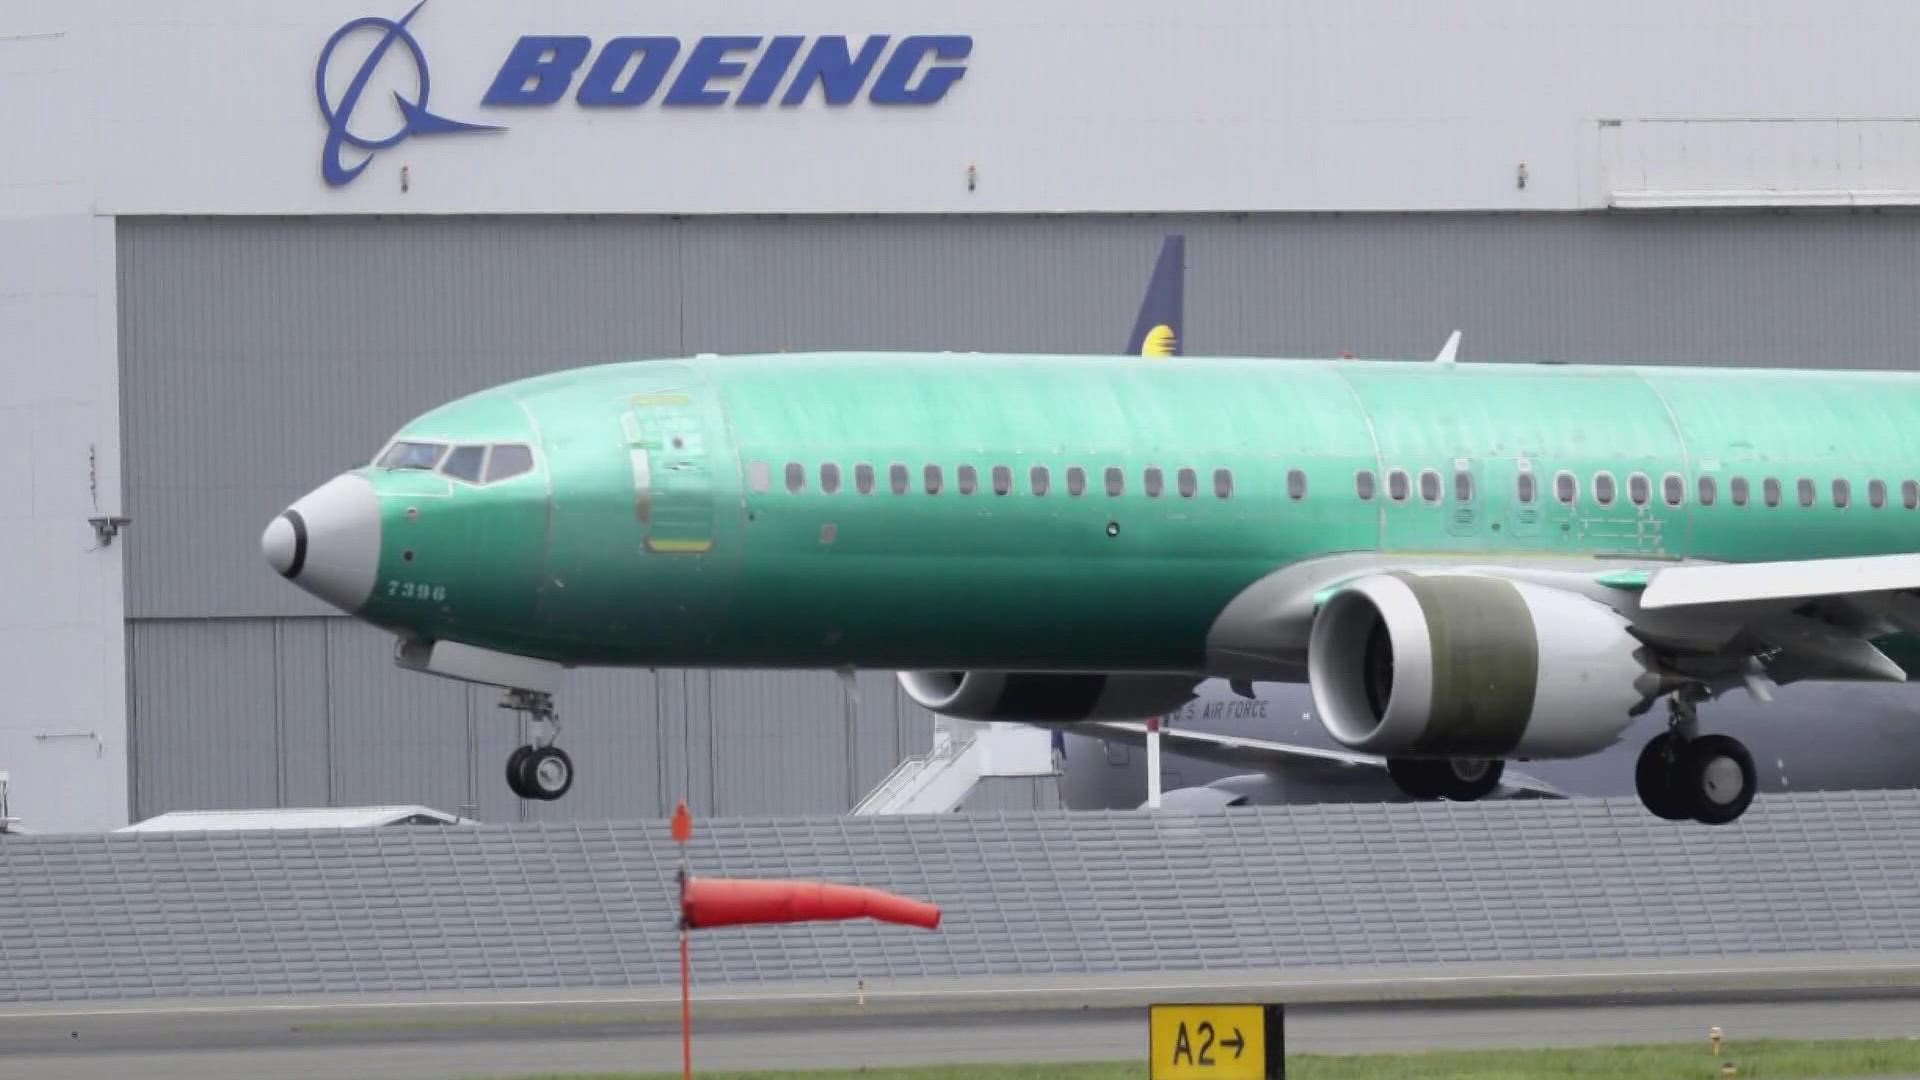 Former Boeing pilot Mark Forkner was found not guilty on all four counts in the 737-MAX fraud case.